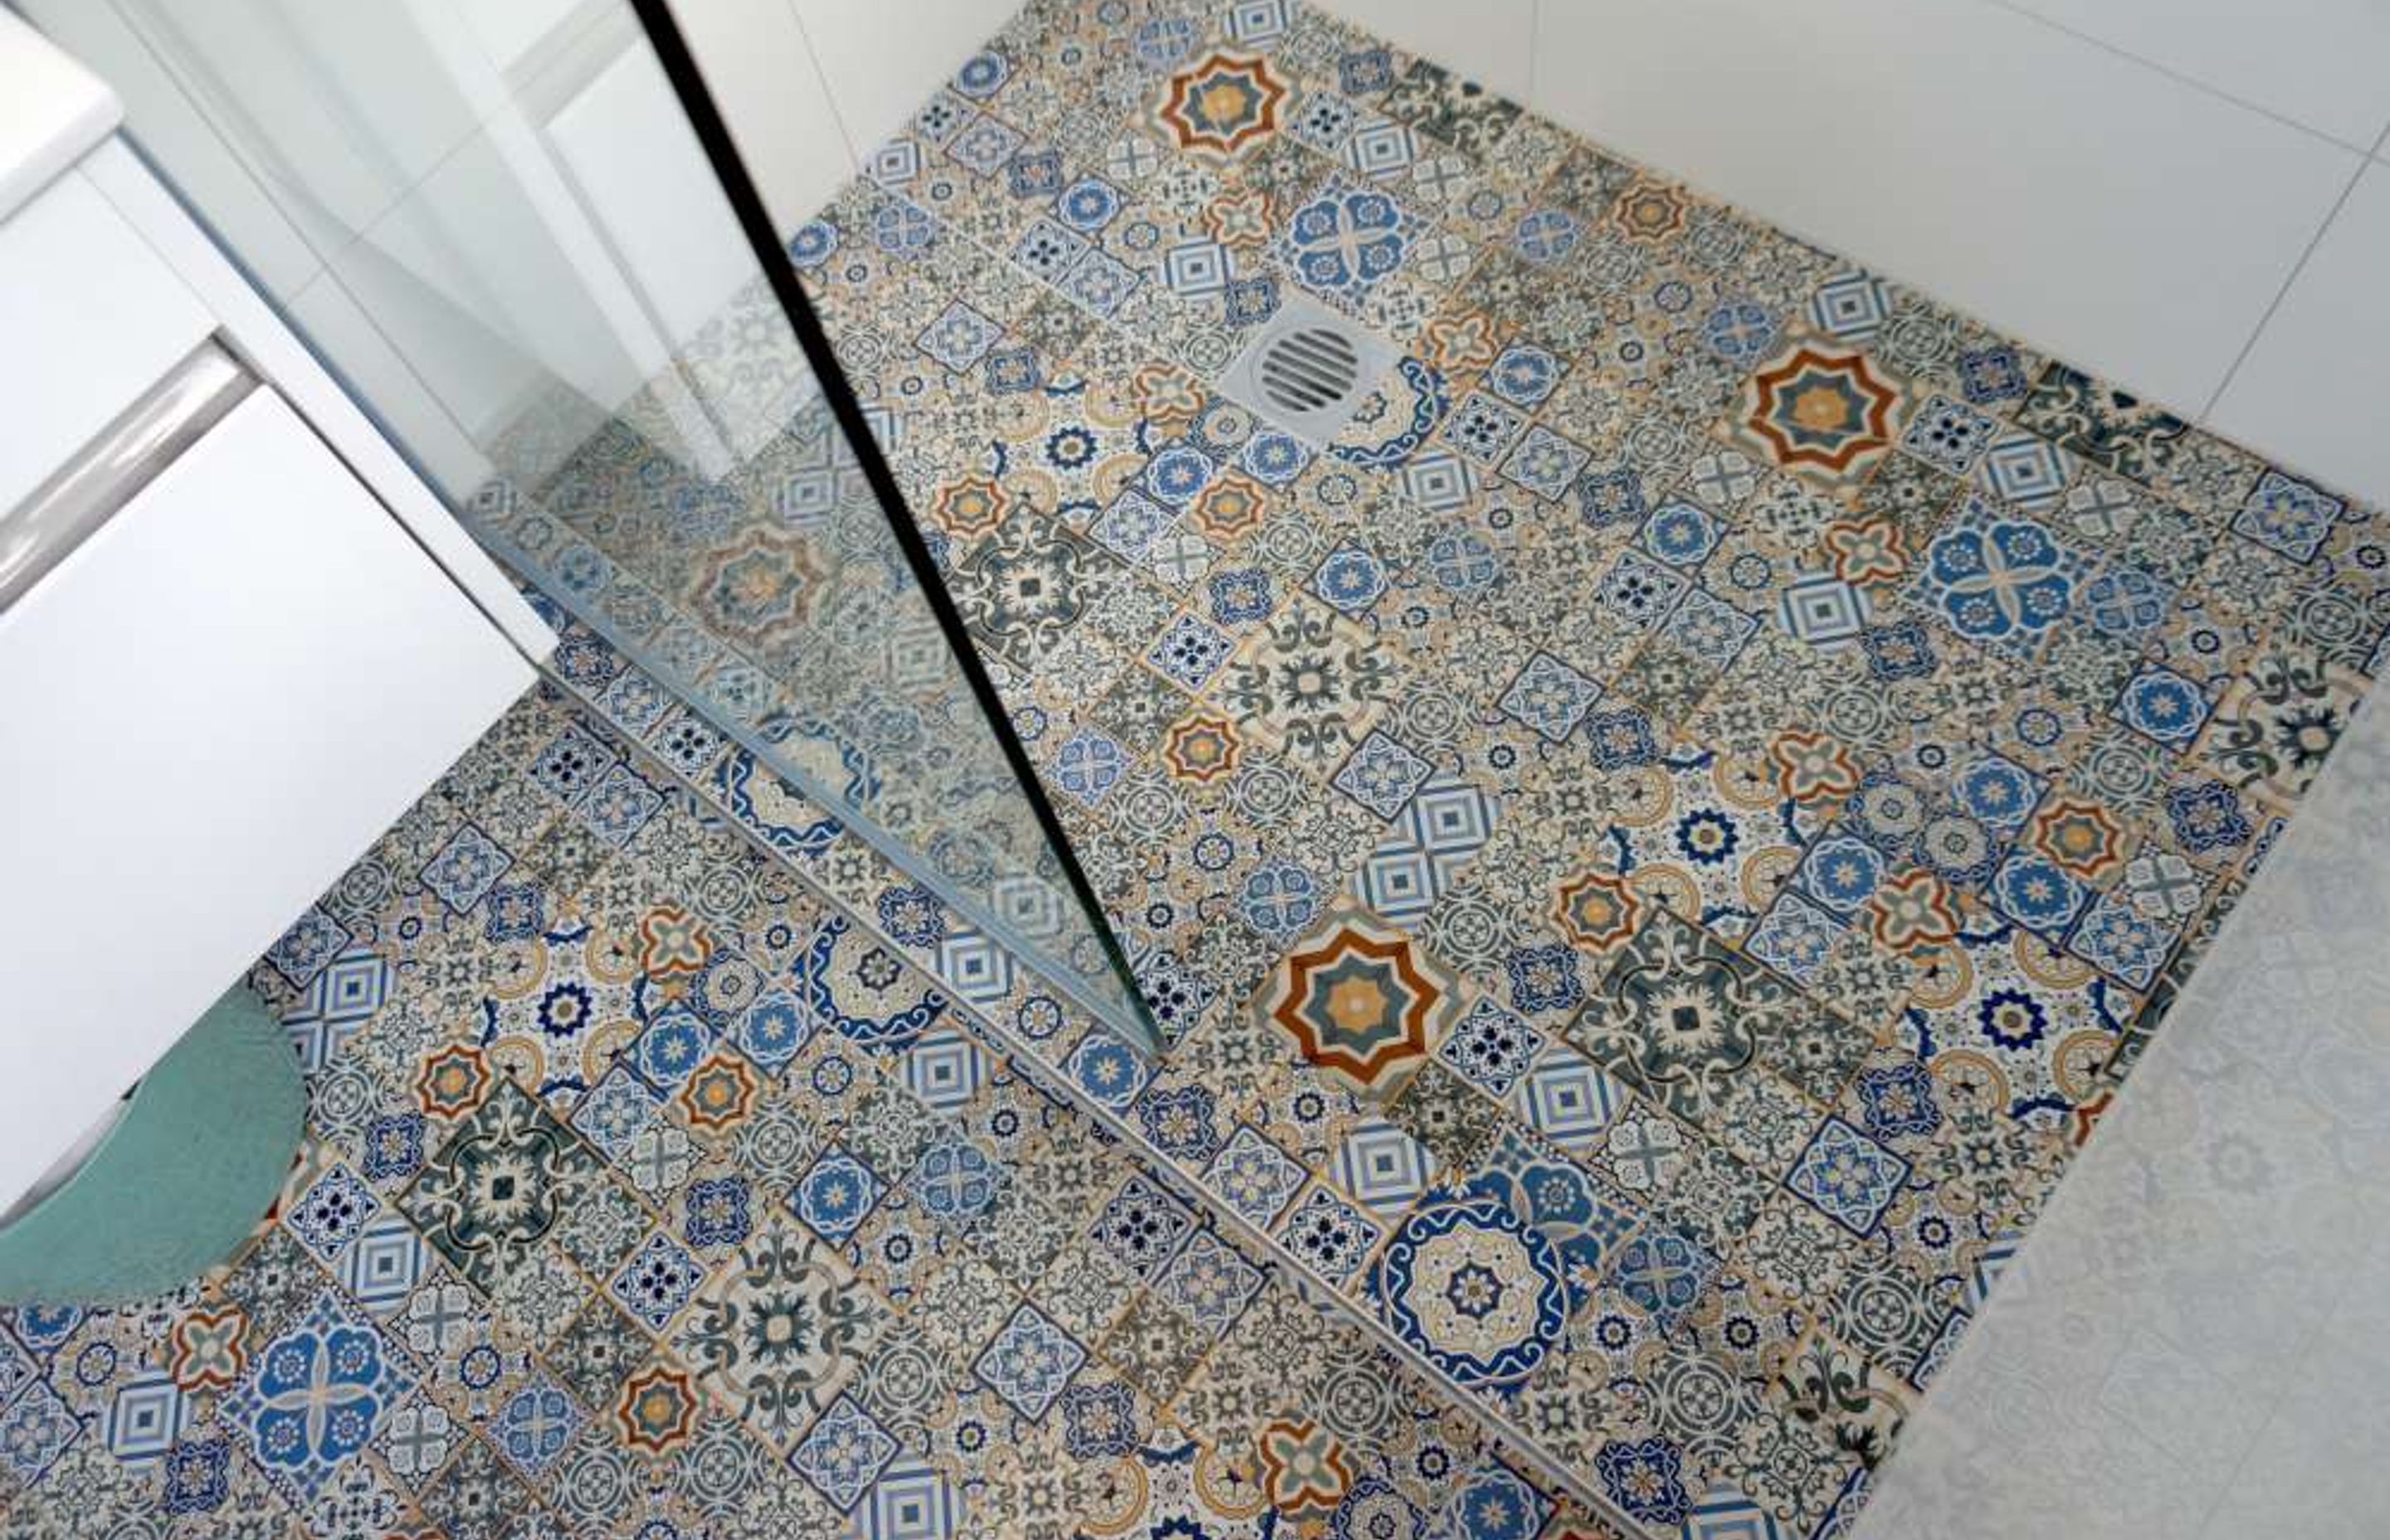 This bathroom in Hillsborough was fully renovated with Mosaic tiles used for the floors.